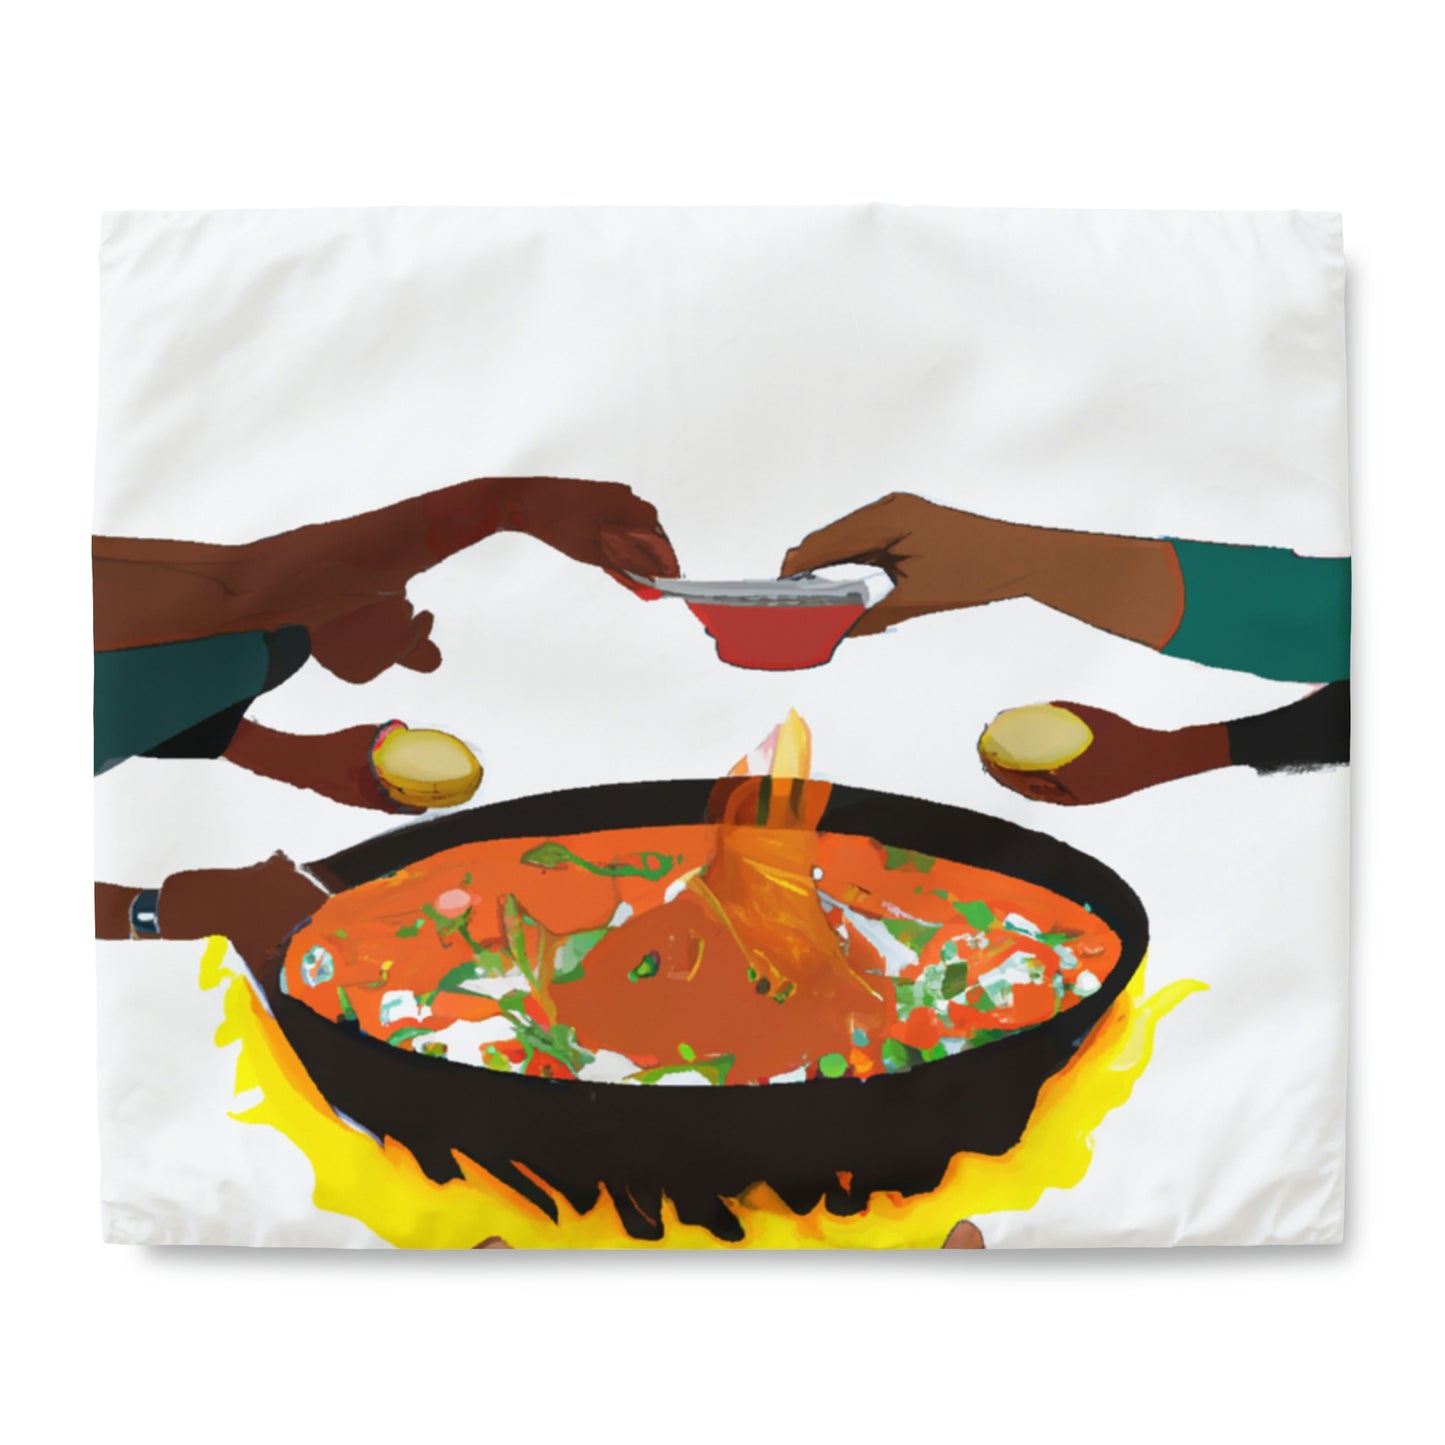 Duvet Cover - Family Cooking